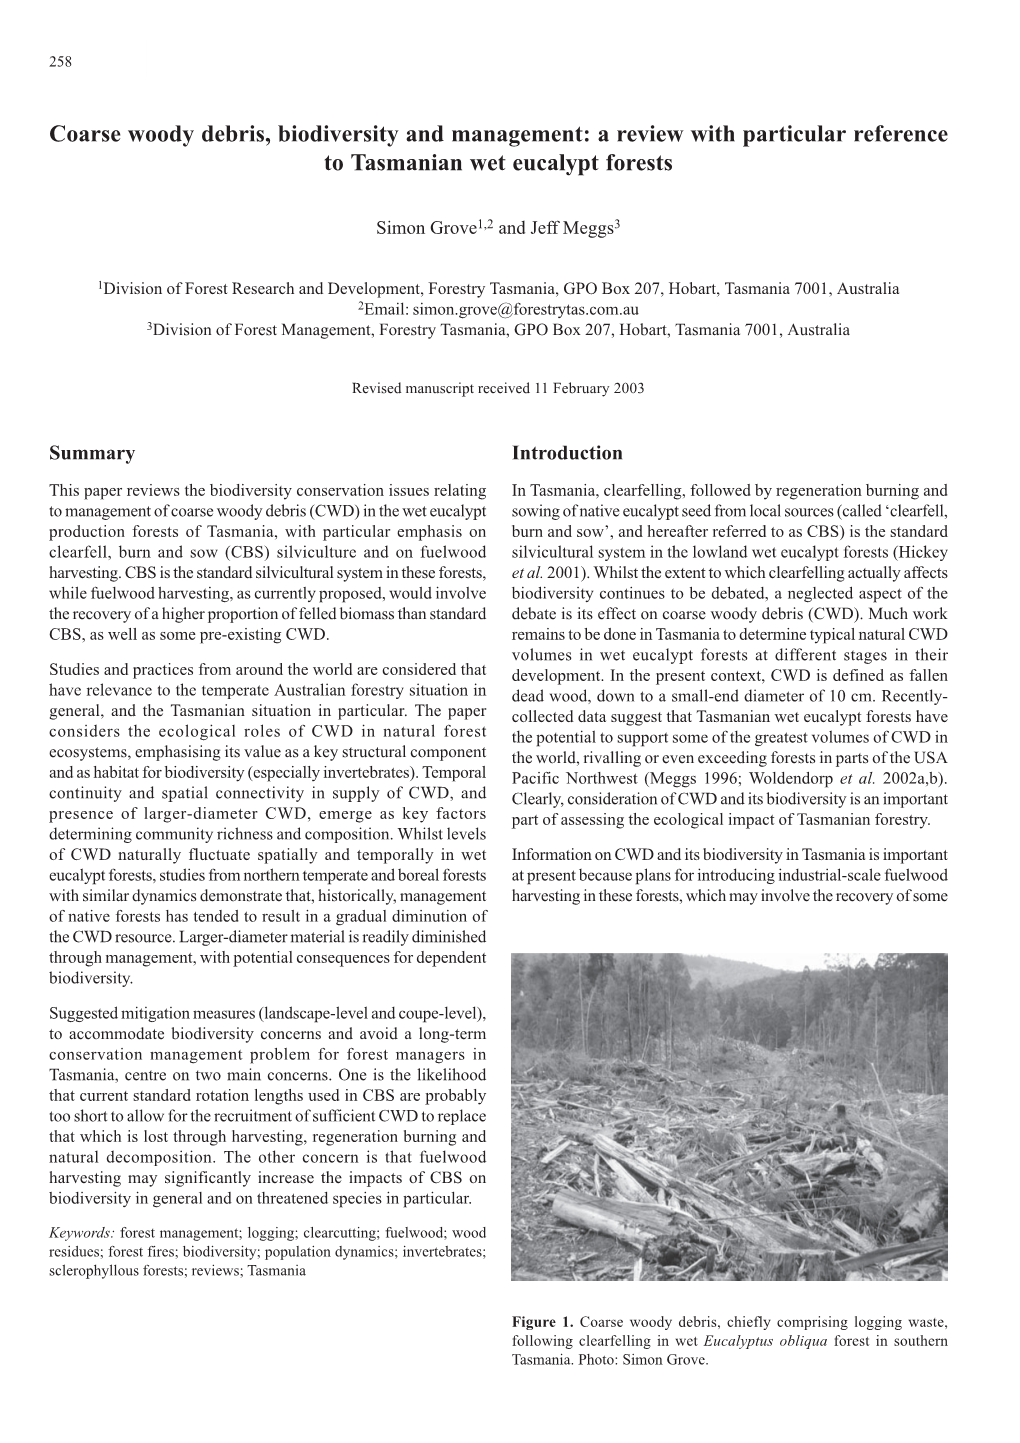 Coarse Woody Debris, Biodiversity and Management: a Review with Particular Reference to Tasmanian Wet Eucalypt Forests